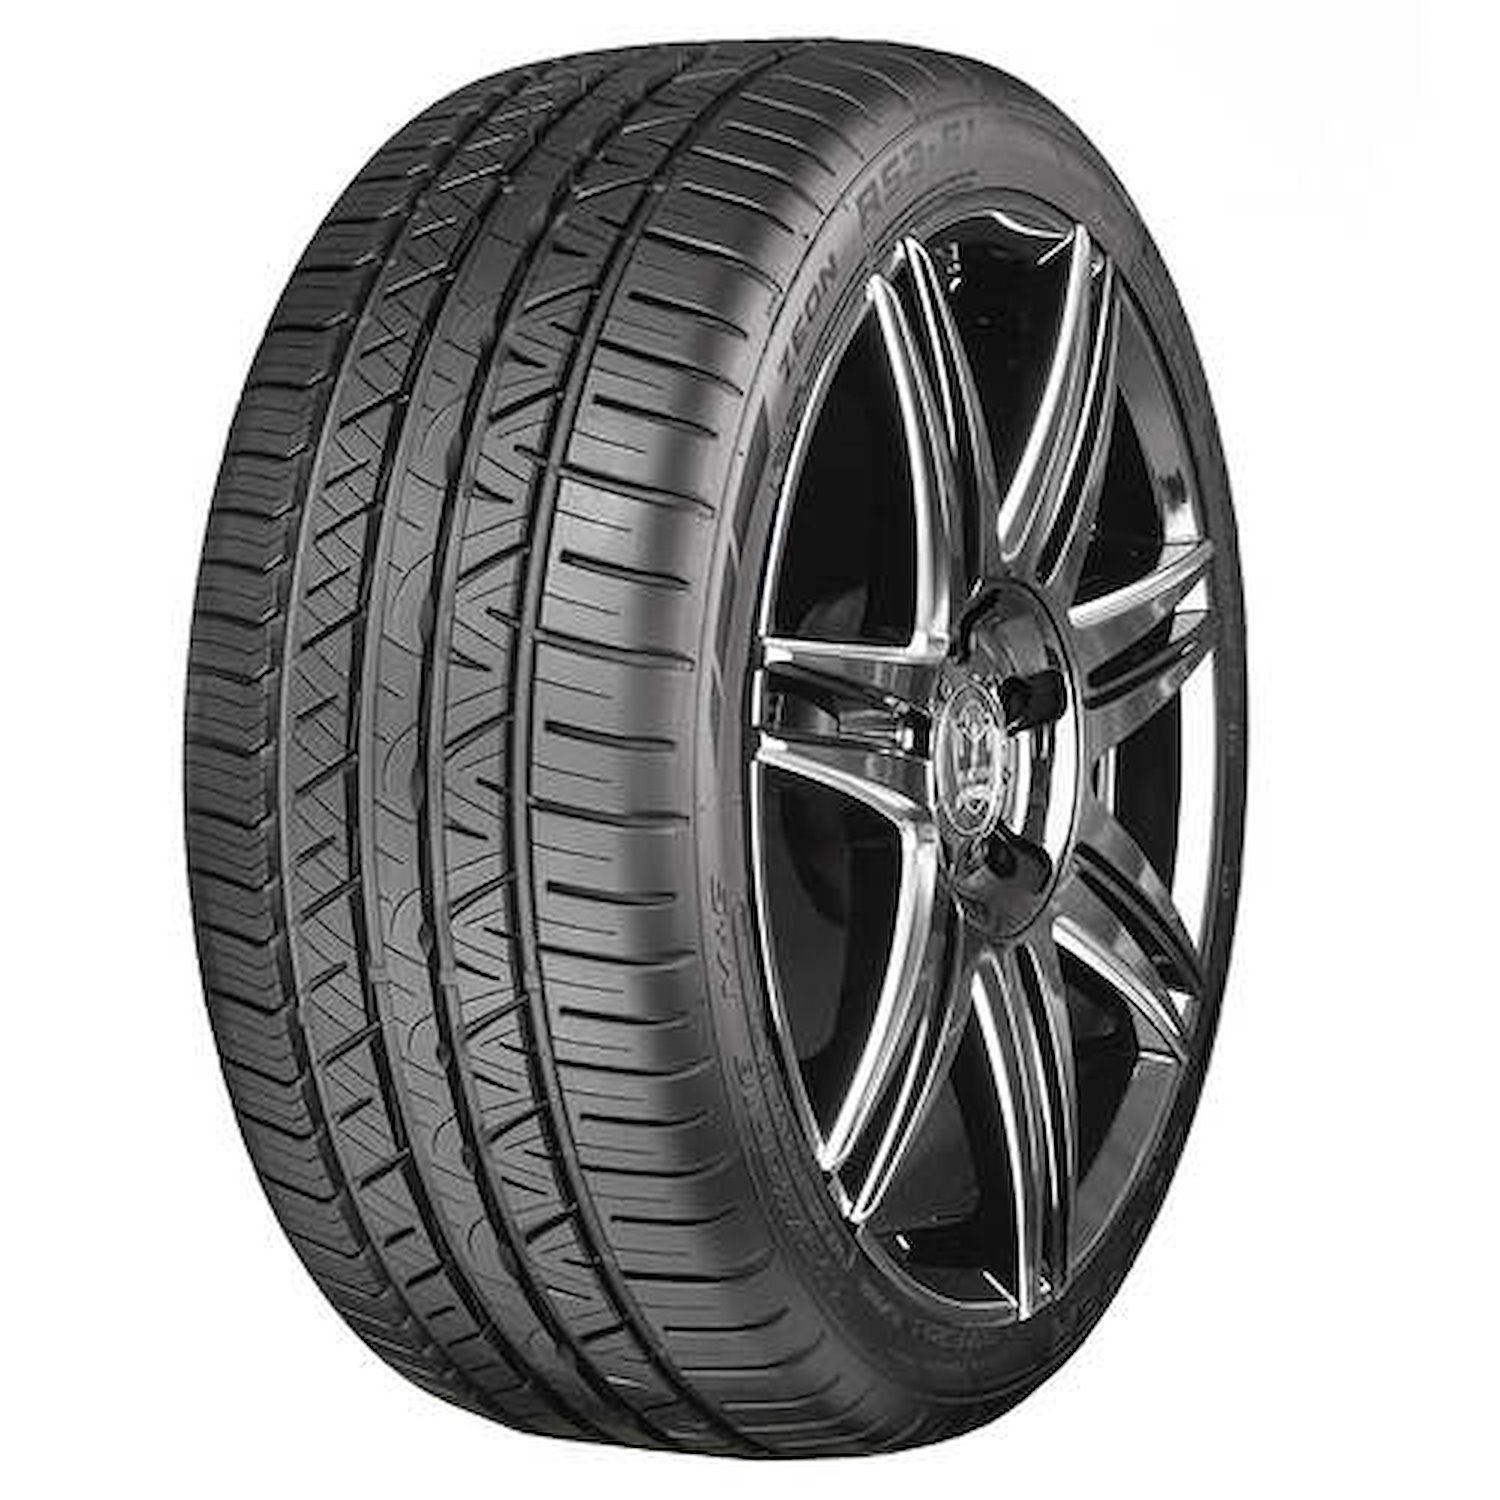 Zeon RS3-G1 High-Performance Tire, 275/40R17